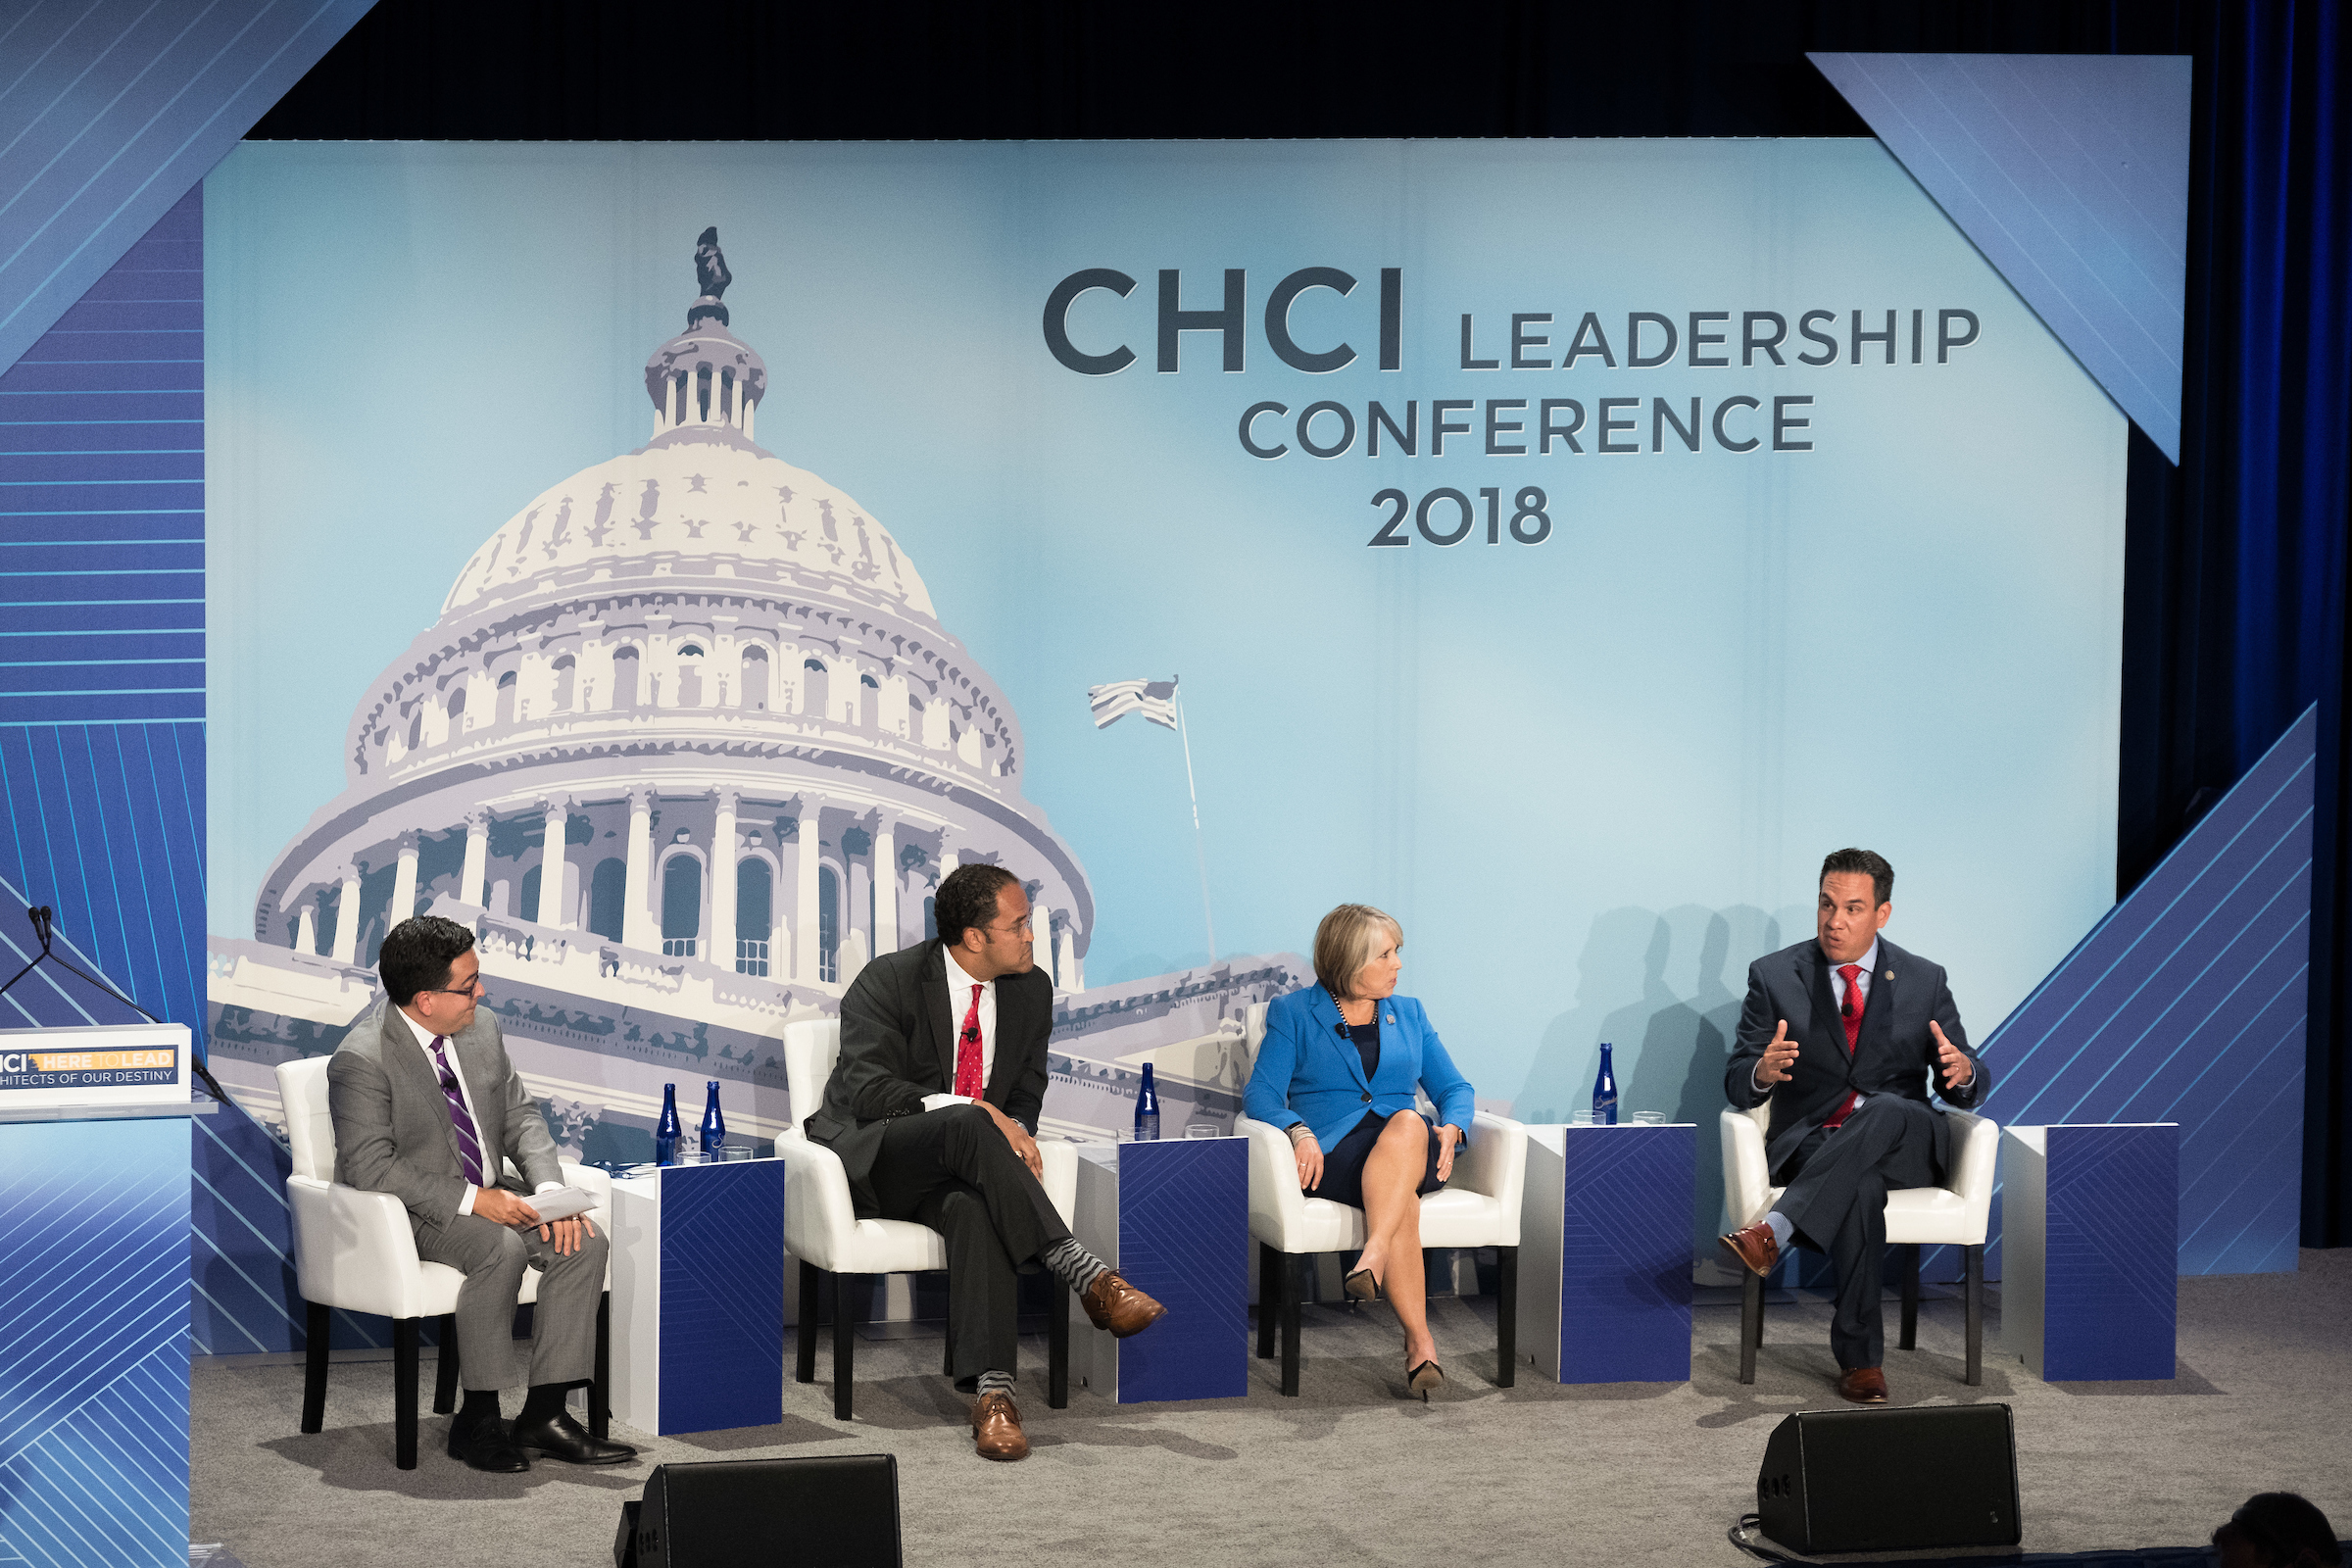 CHCI Leadership Conference on September 12th, 2018.